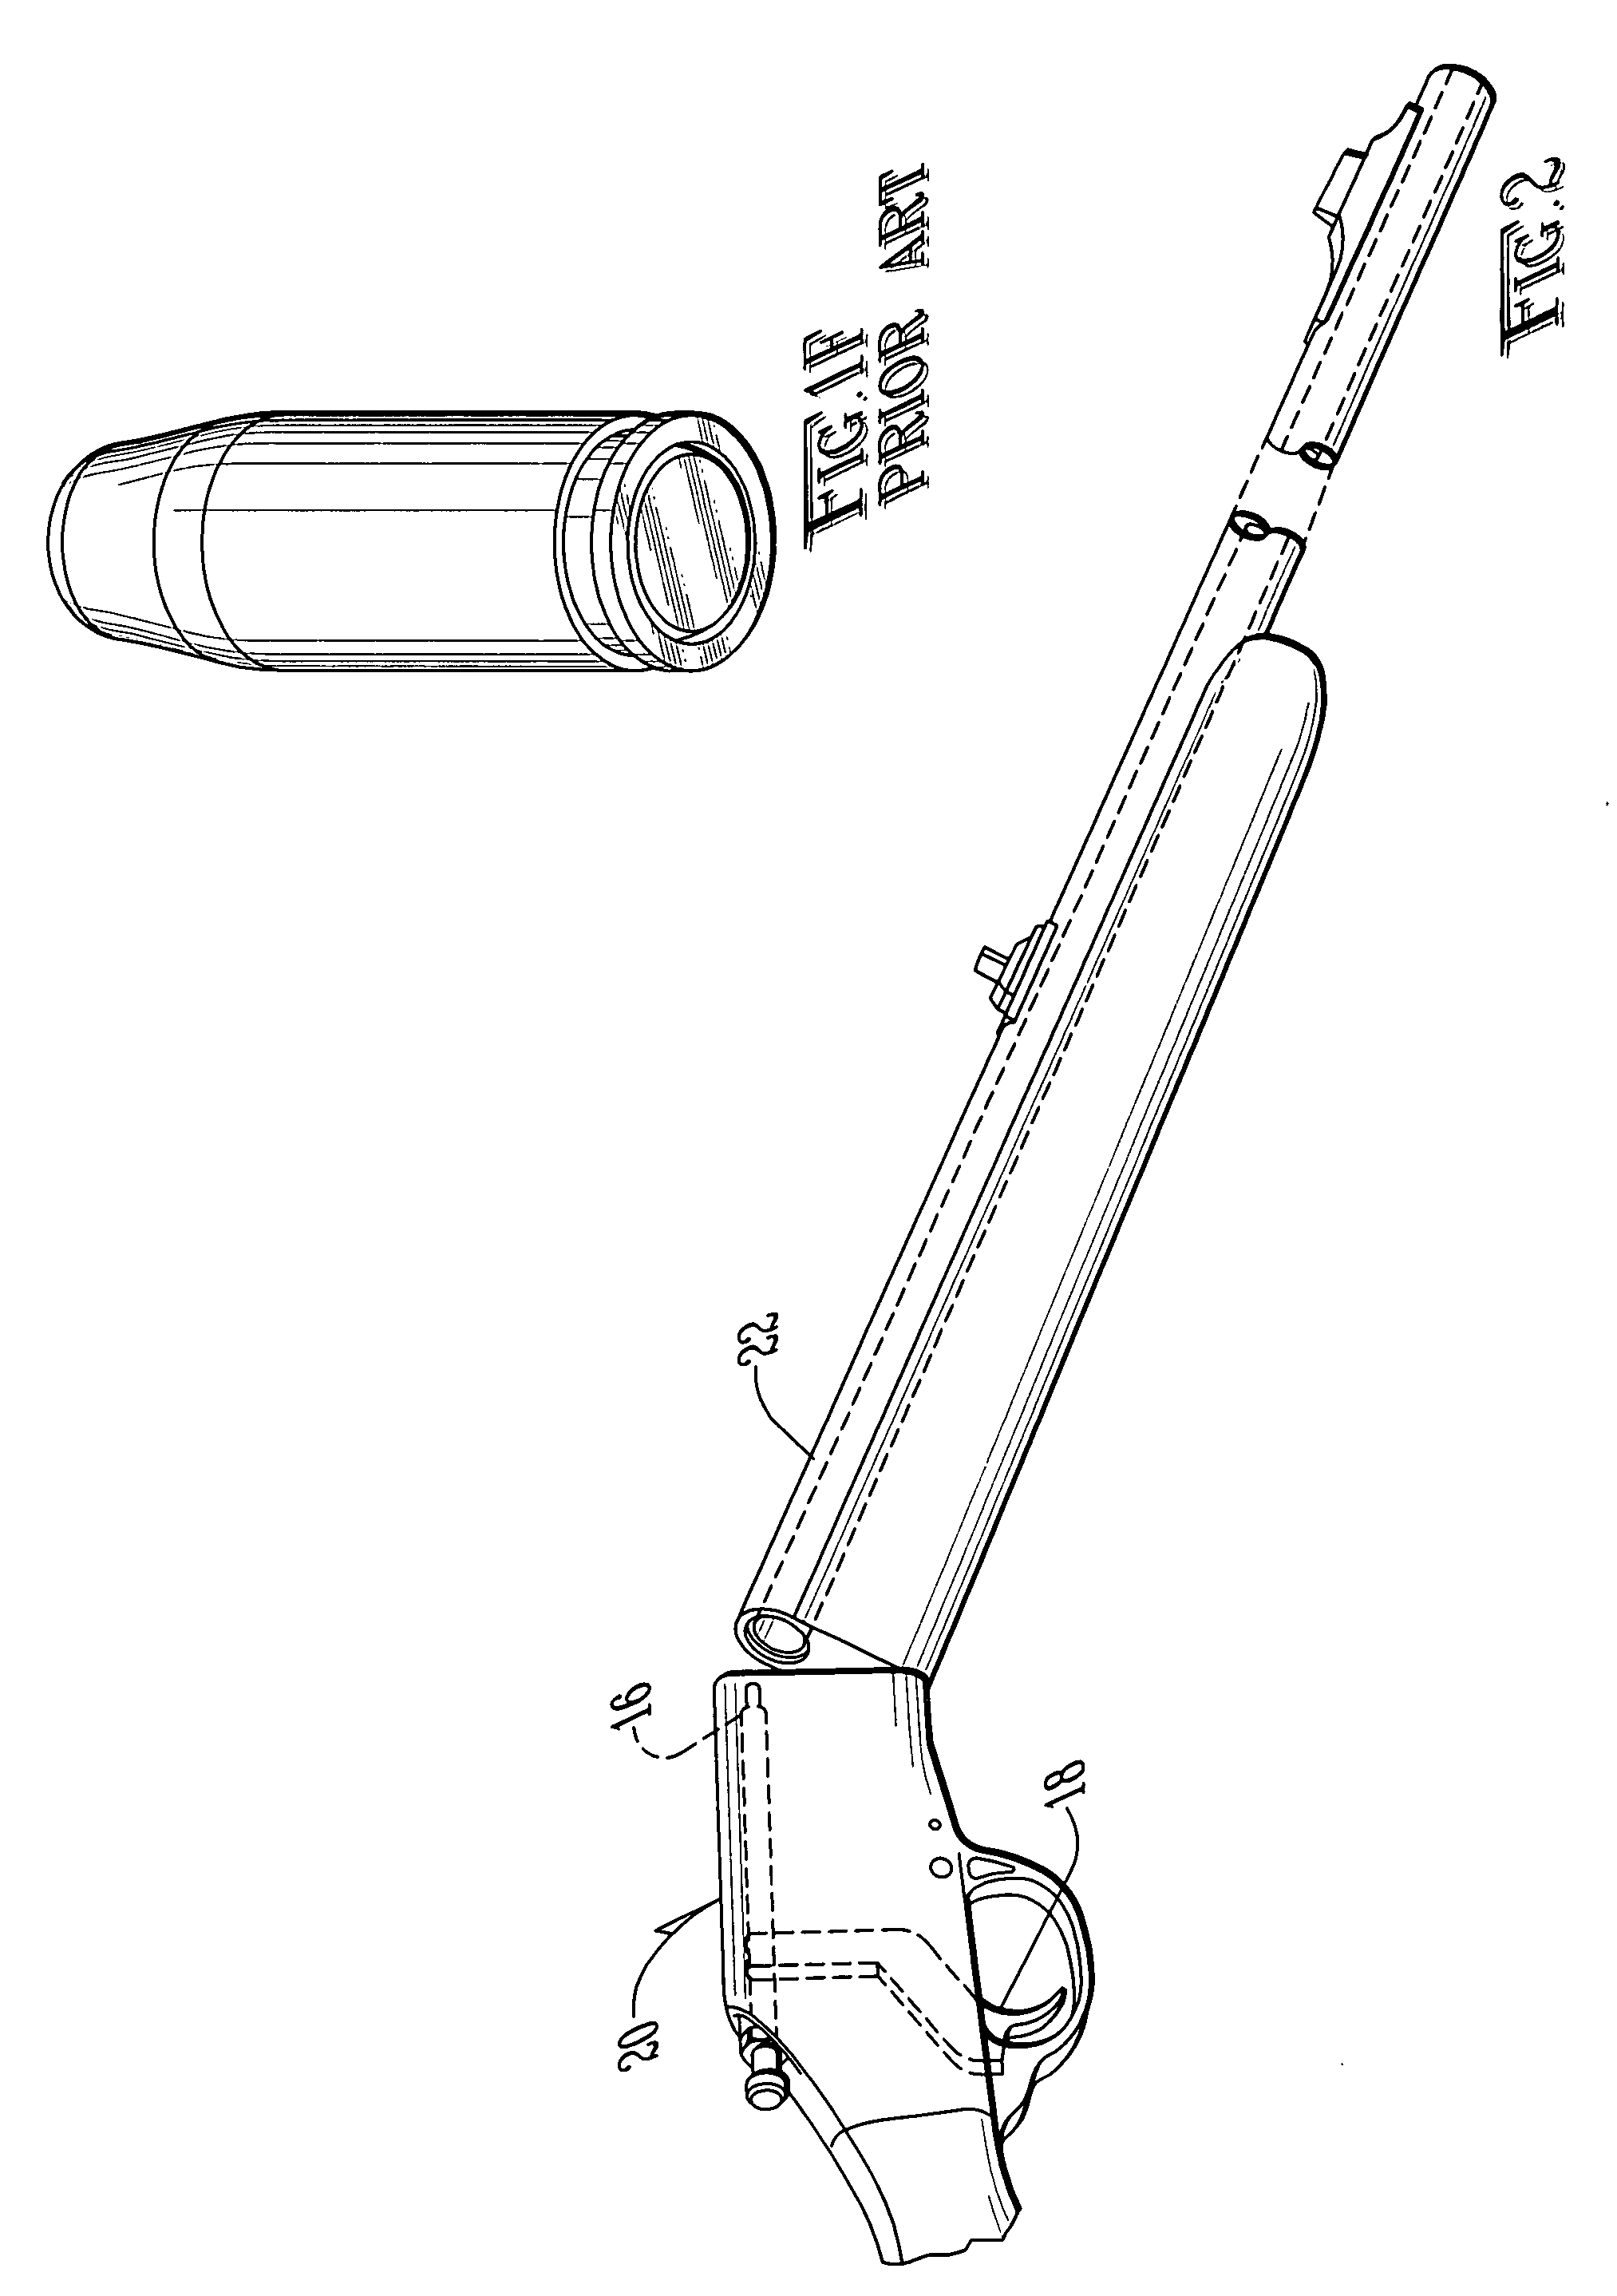 Method and apparatus for propelling a pellet or BB using a shock-sensitive explosive cap